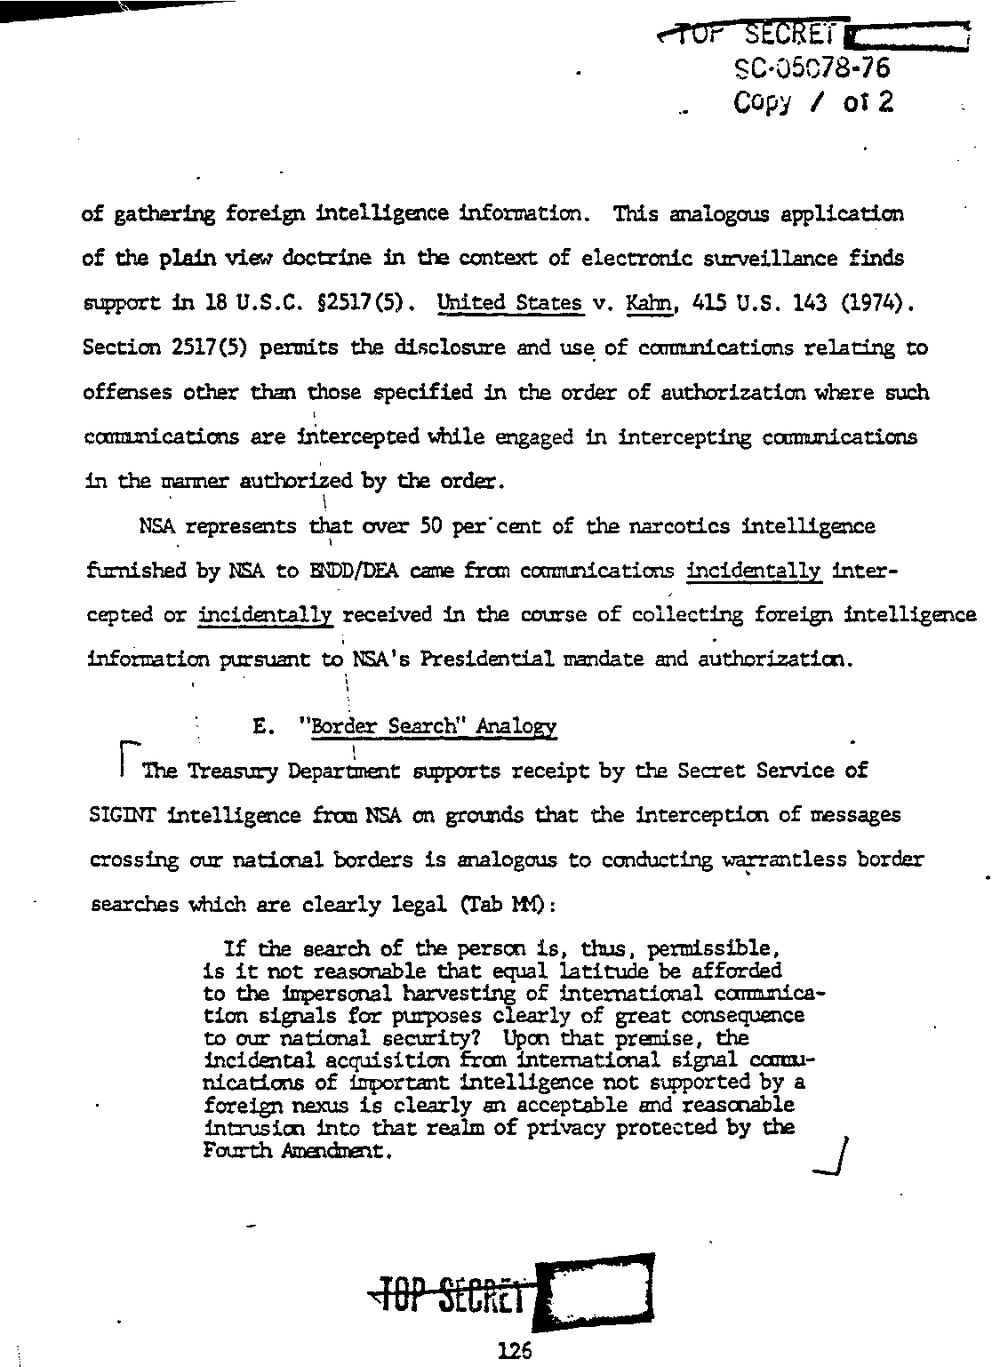 Page 134 from Report on Inquiry Into CIA Related Electronic Surveillance Activities